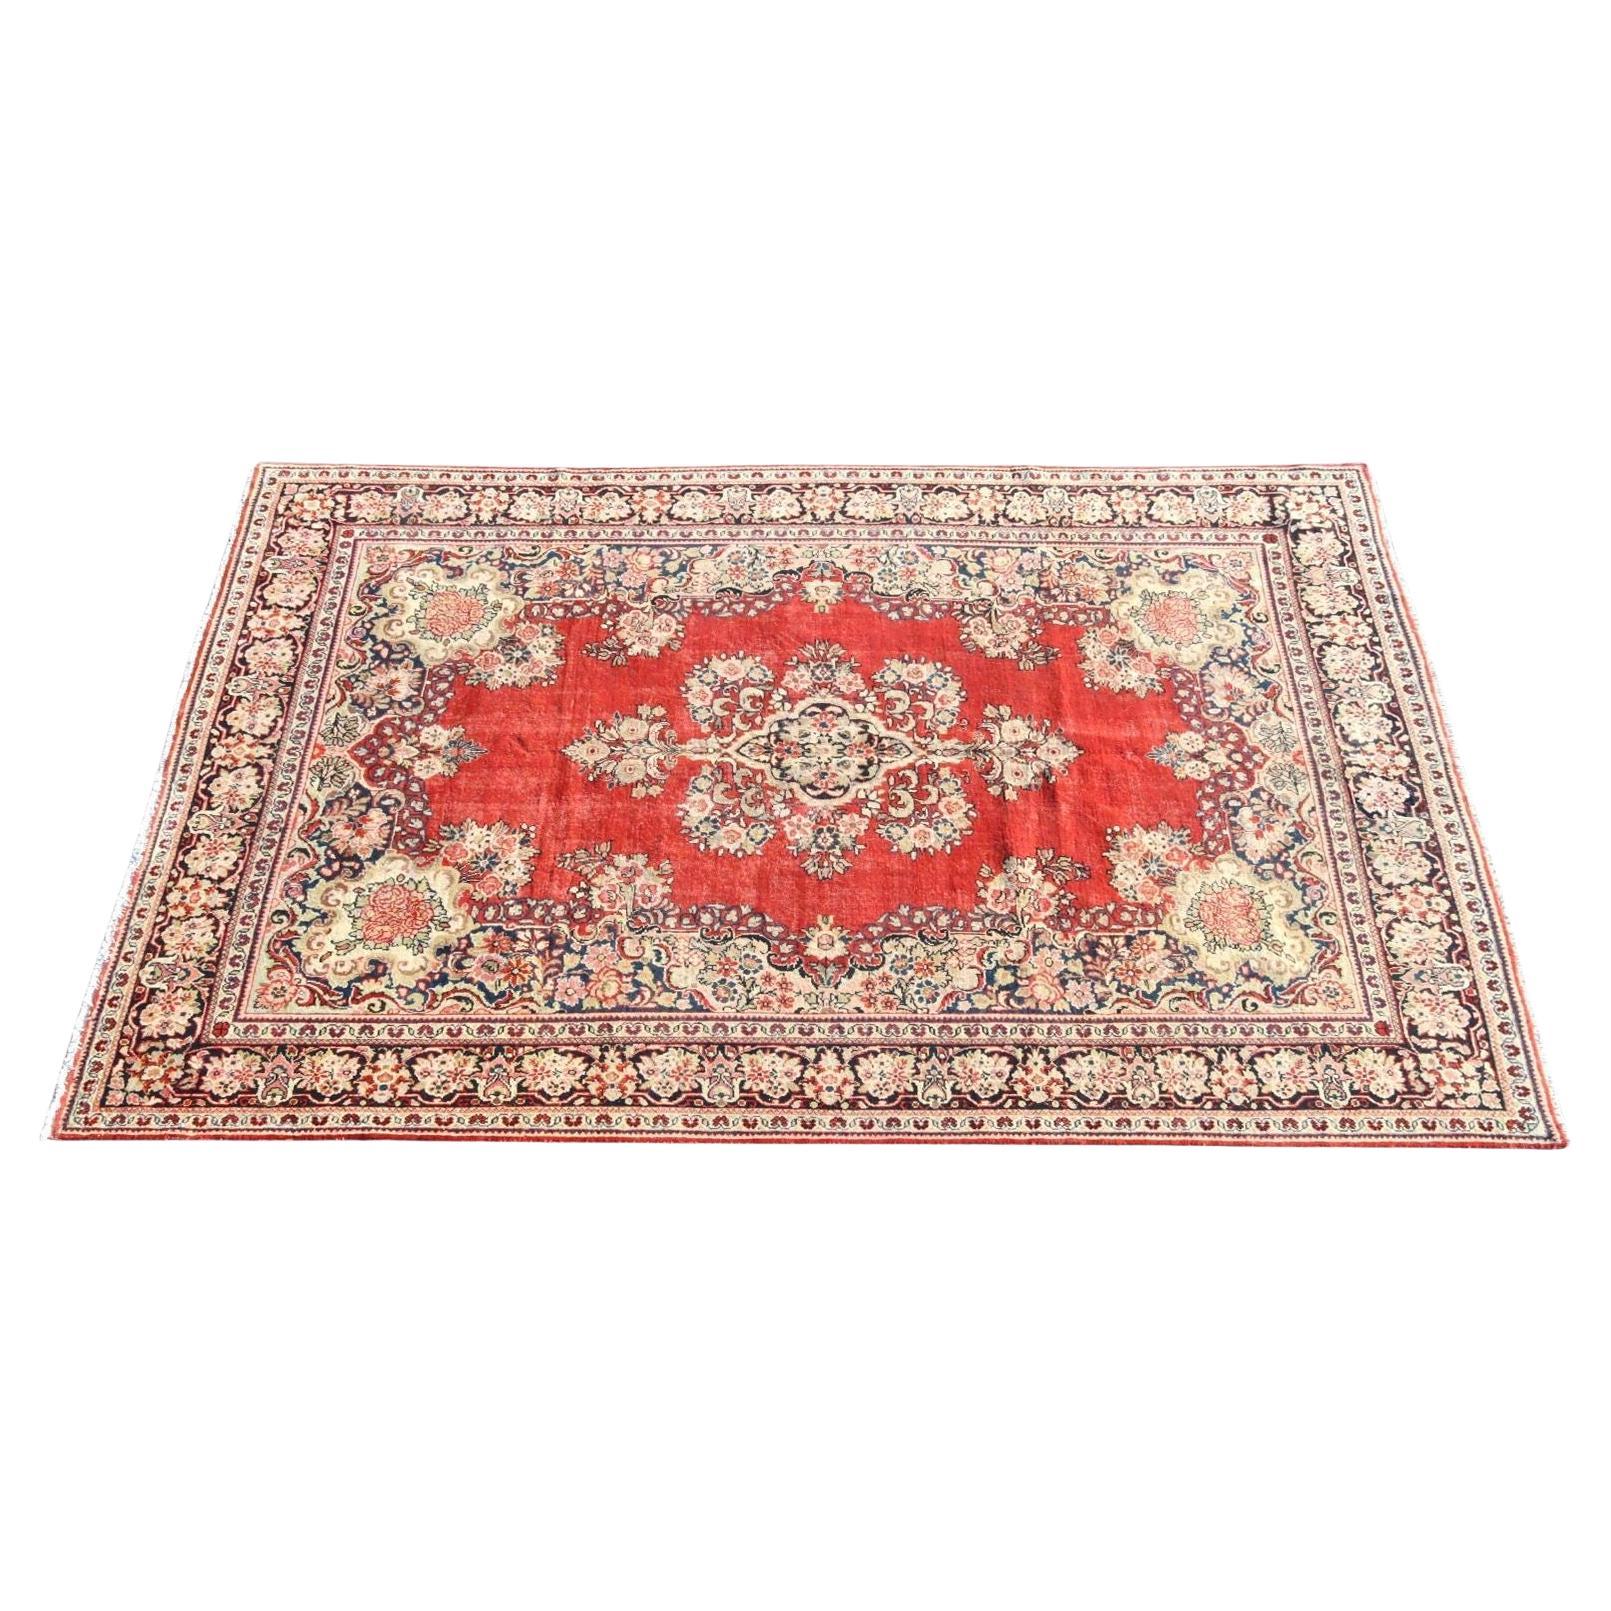 Early 20th Century Hand-Tied Persian Mahal Rug For Sale